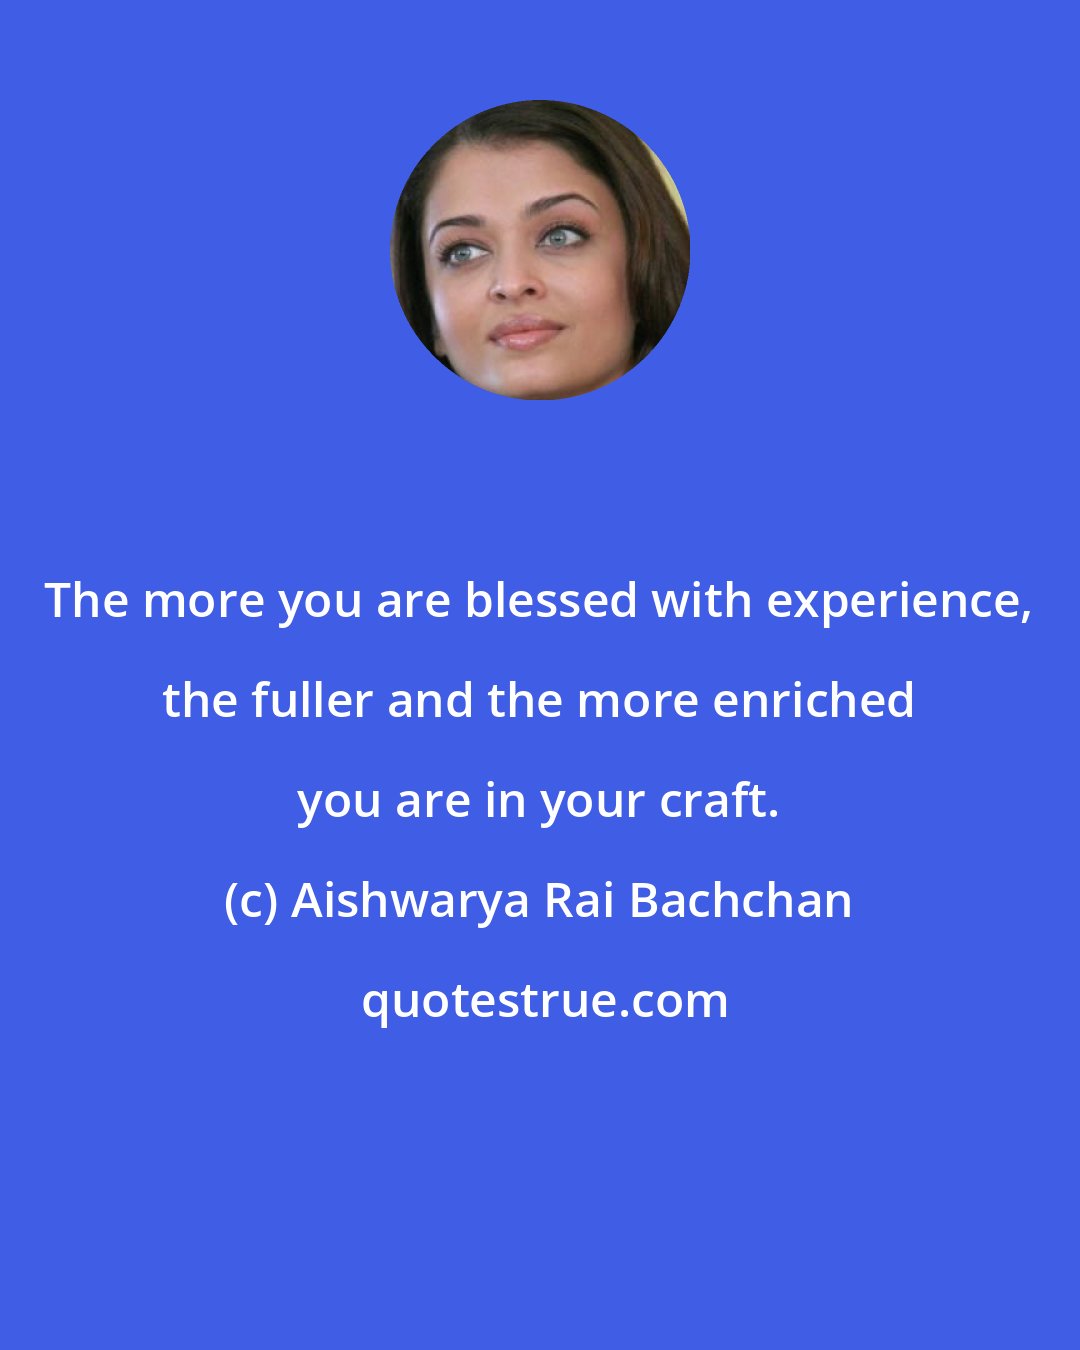 Aishwarya Rai Bachchan: The more you are blessed with experience, the fuller and the more enriched you are in your craft.